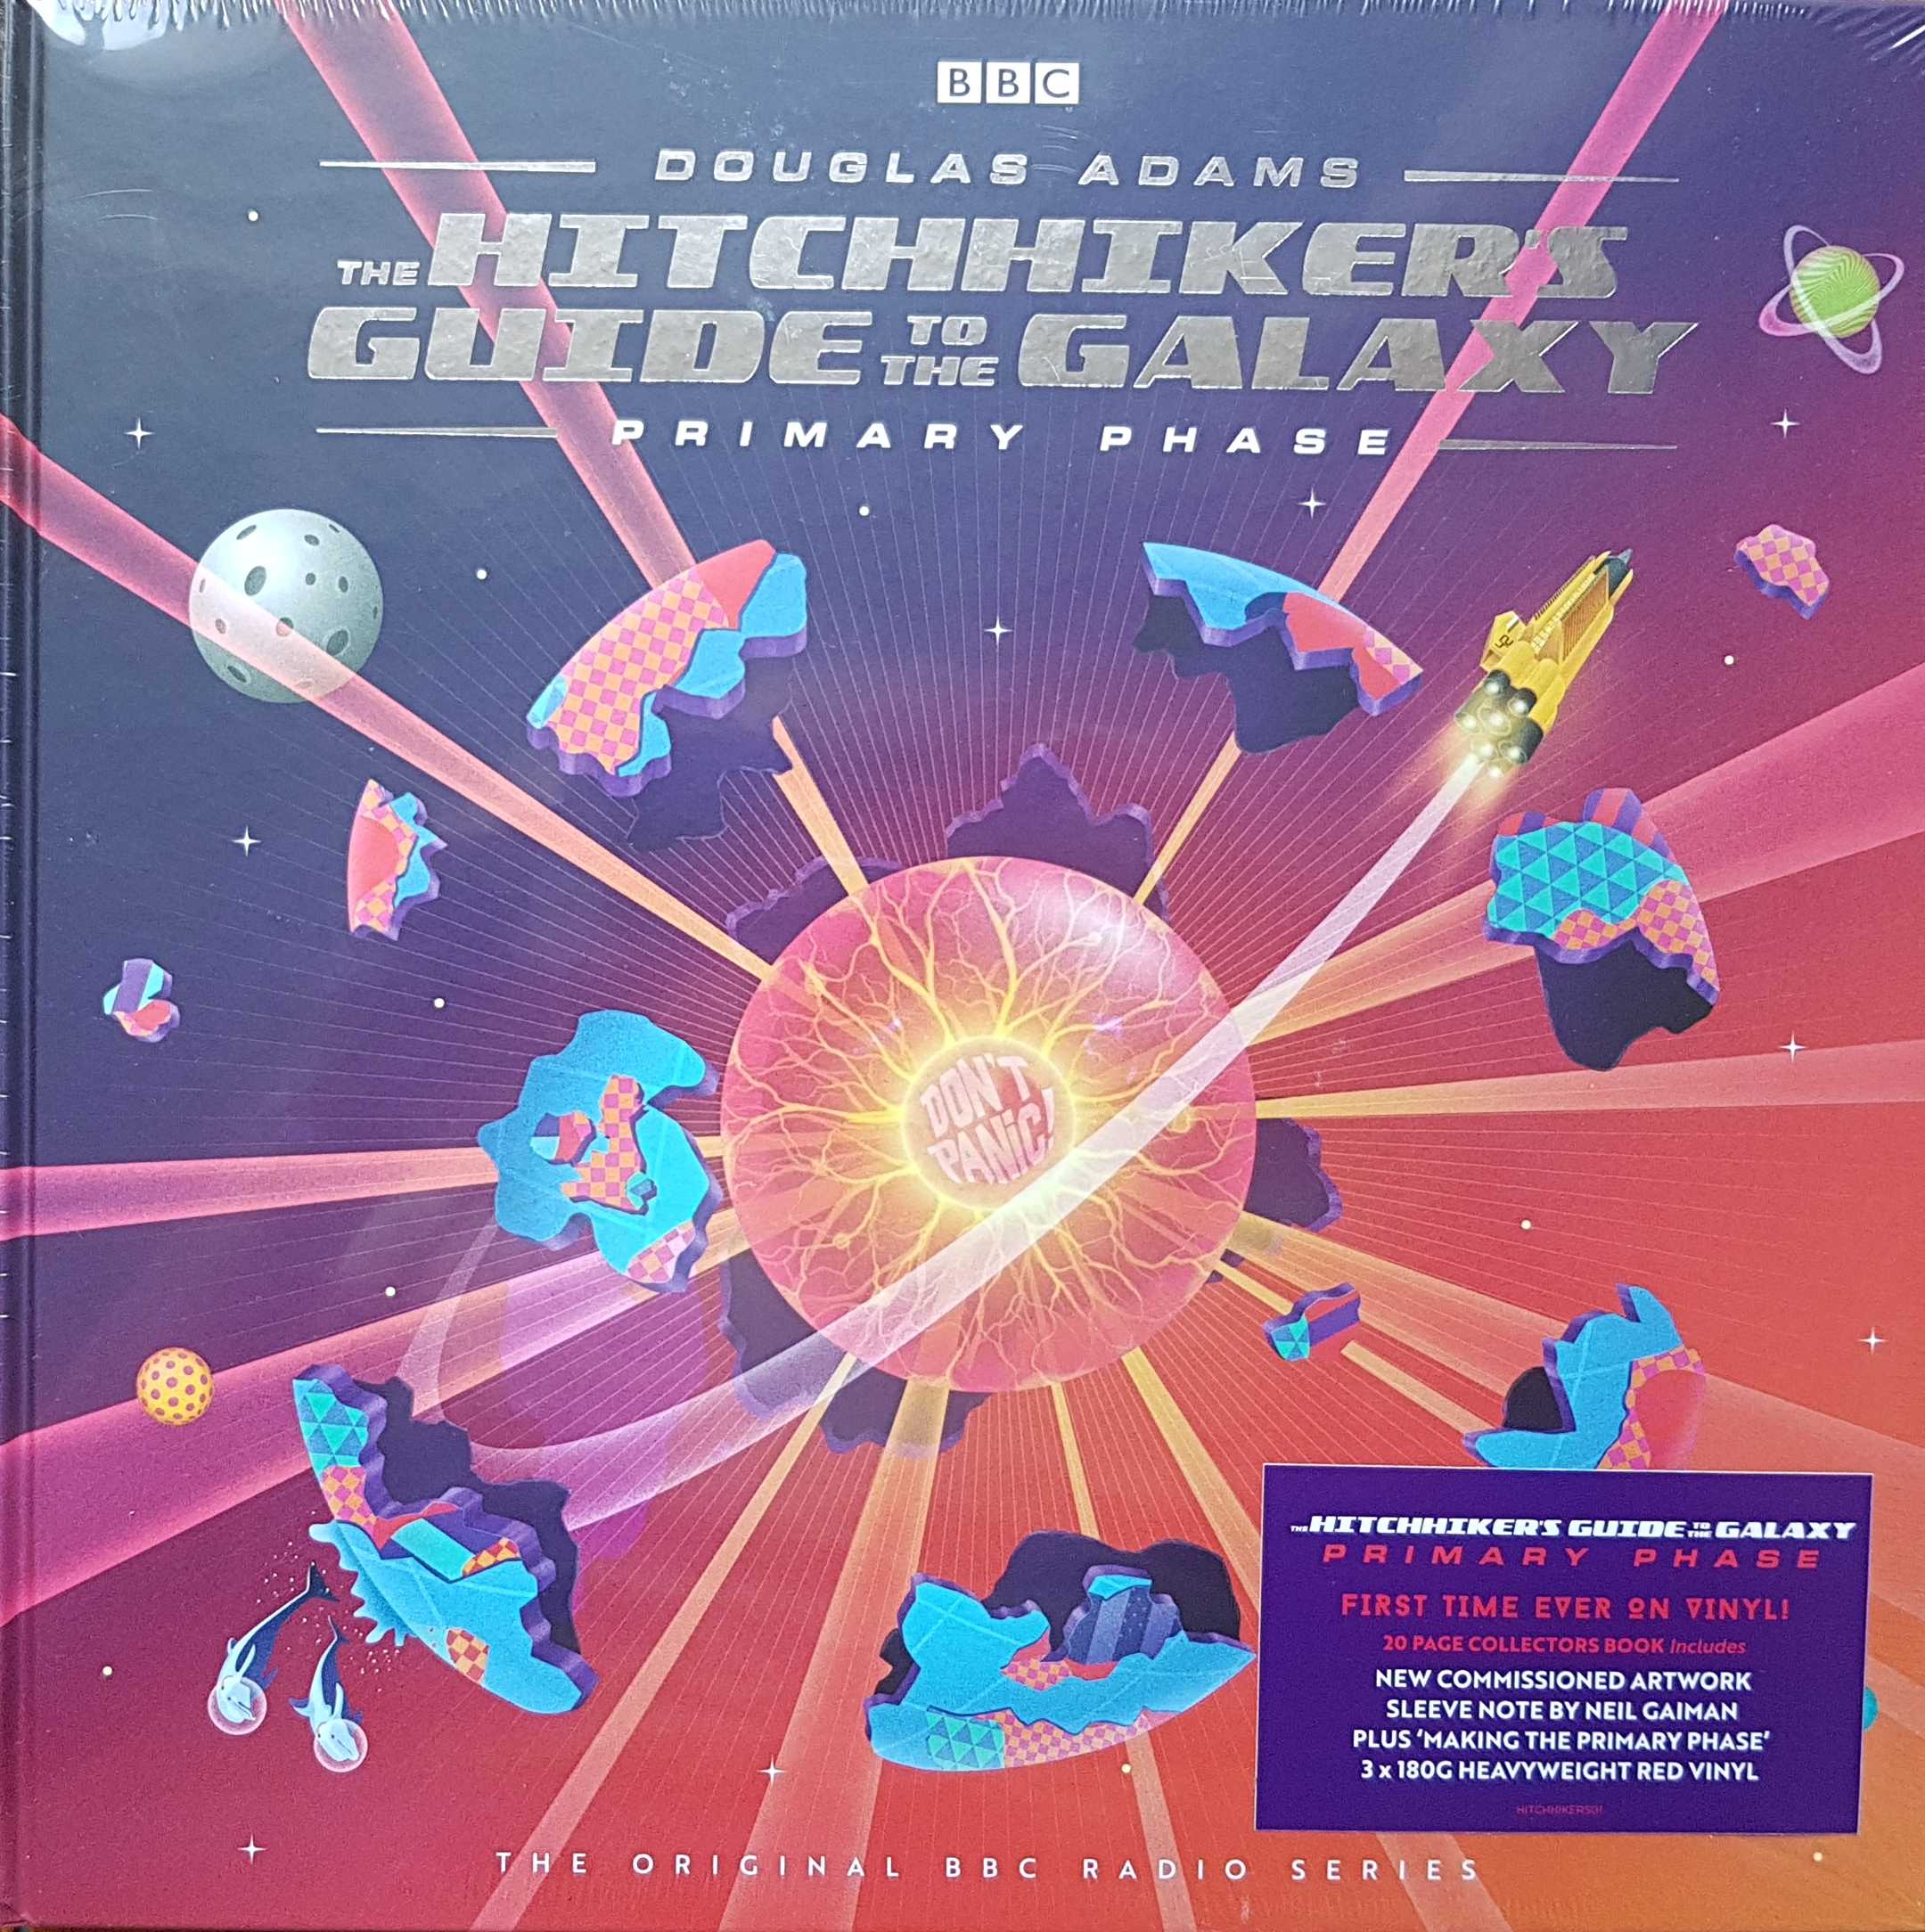 Picture of The hitchhiker's guide to the galaxy - Primary phrase by artist Douglas Adams from the BBC albums - Records and Tapes library